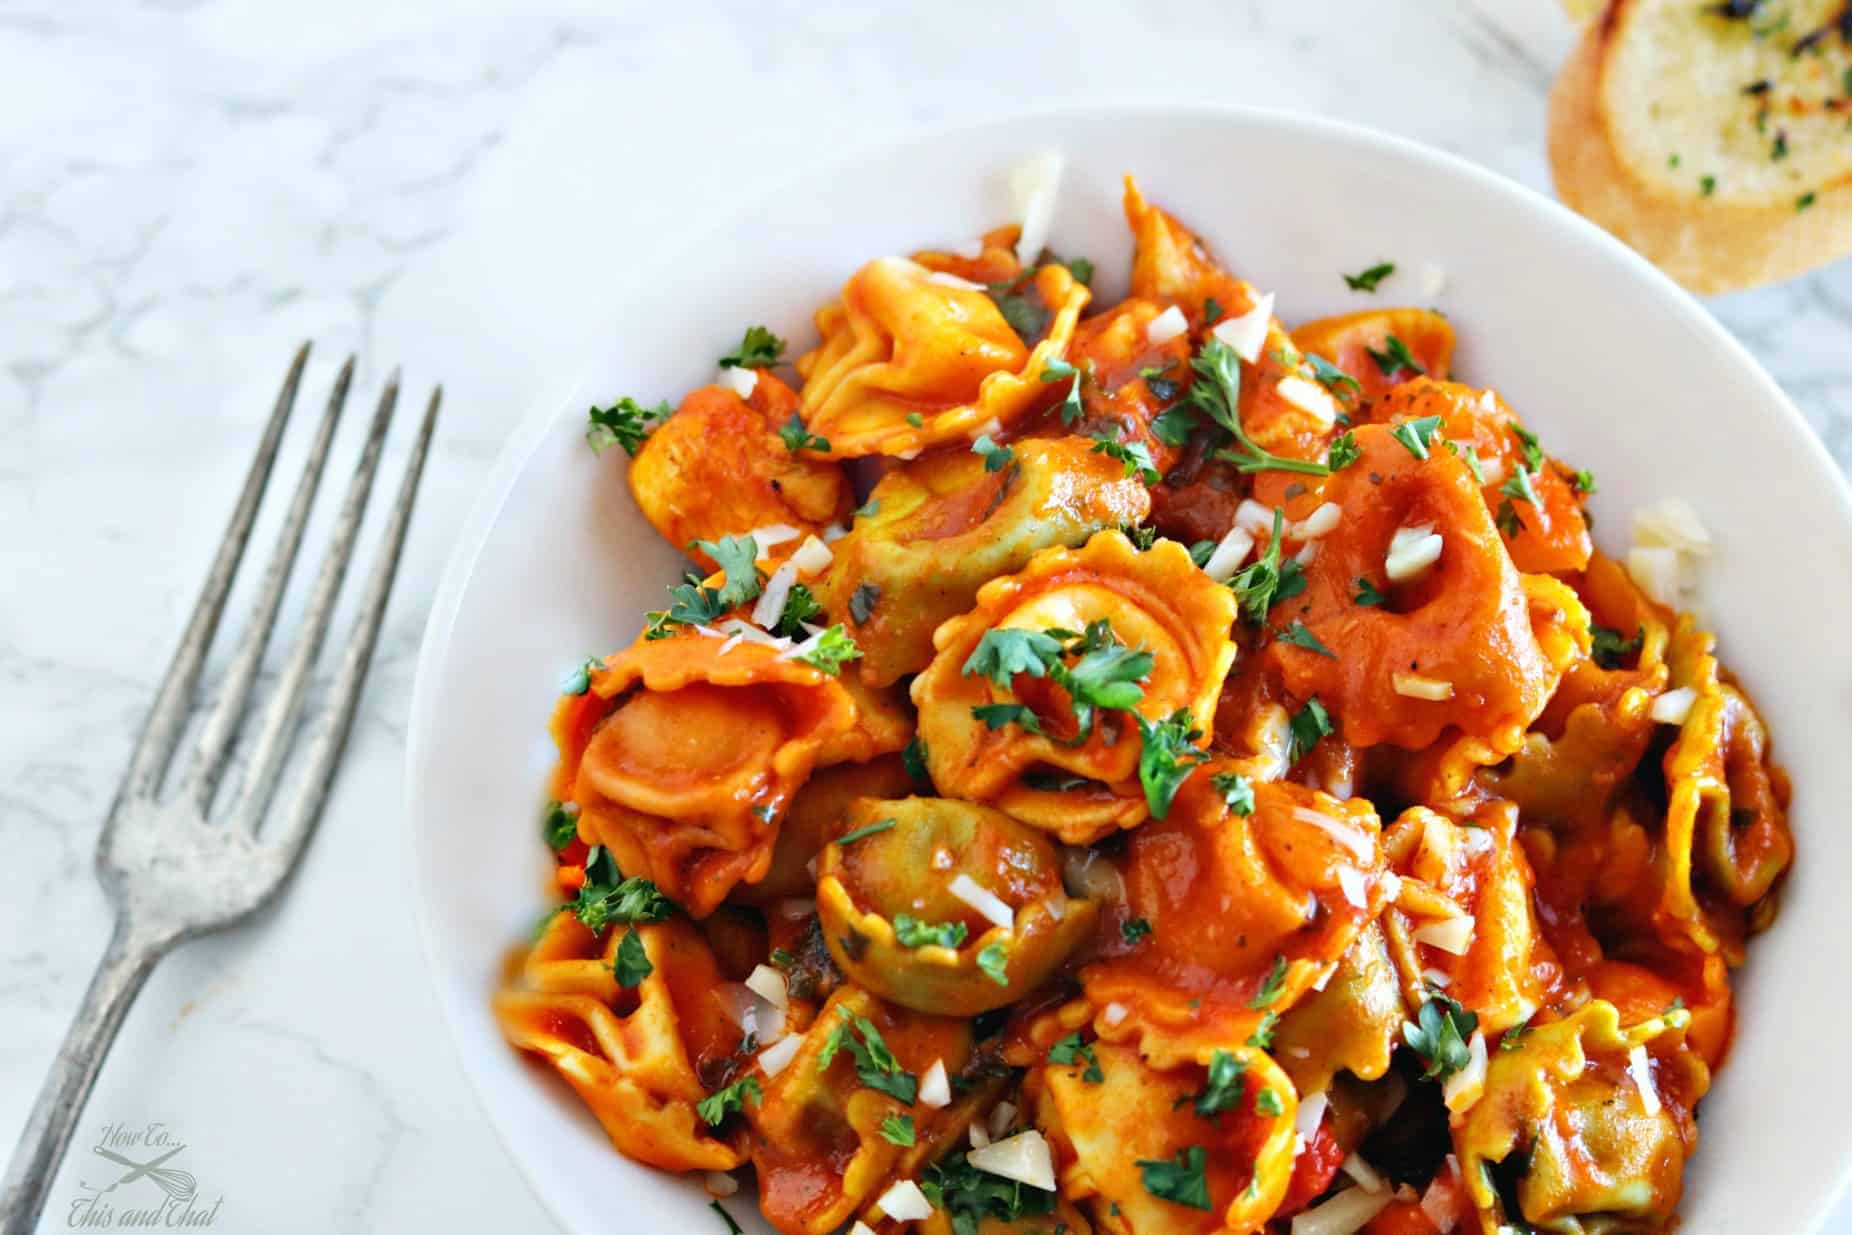 chicken and cheese tortellini in fire roasted red pepper sauce.